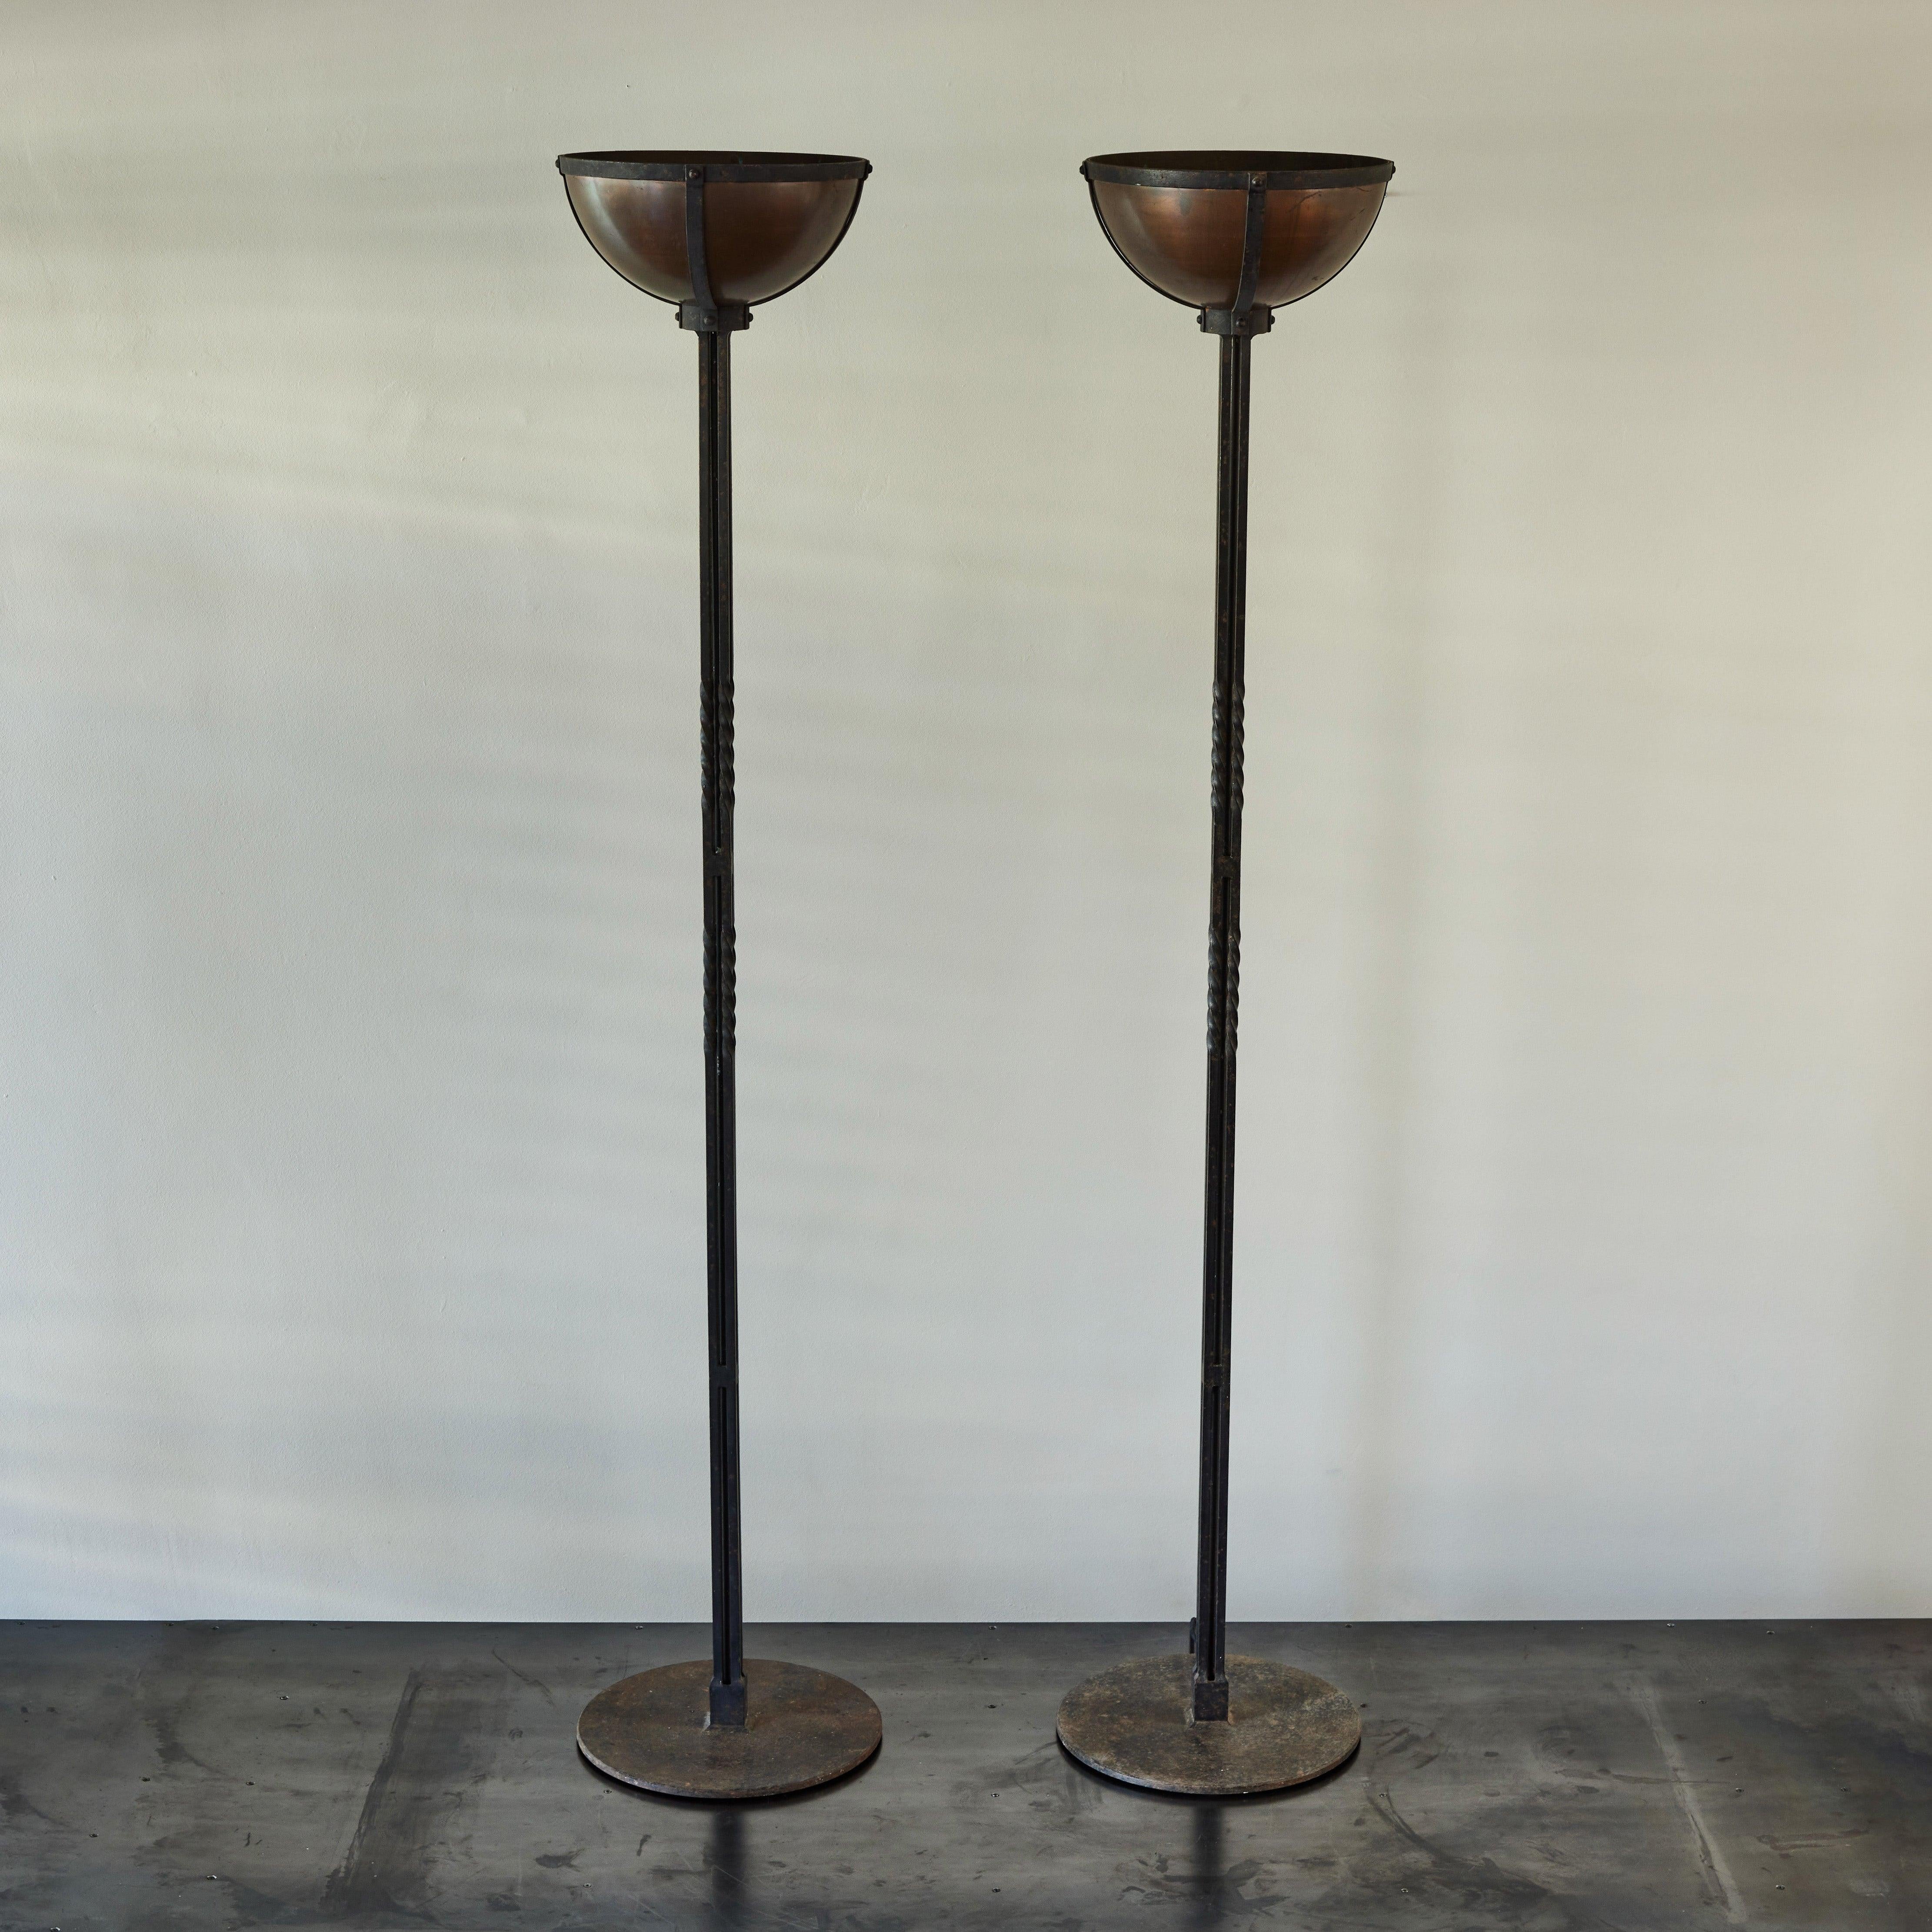 Pair of 1920s Spanish cast-iron floor lamps. Striking and unique, the pair features beautifully turned stems and brass uplighting shades. A dramatic lighting arrangement with a Gothic Revival feel. 

Dimensions: 14W x 14D x 79H.